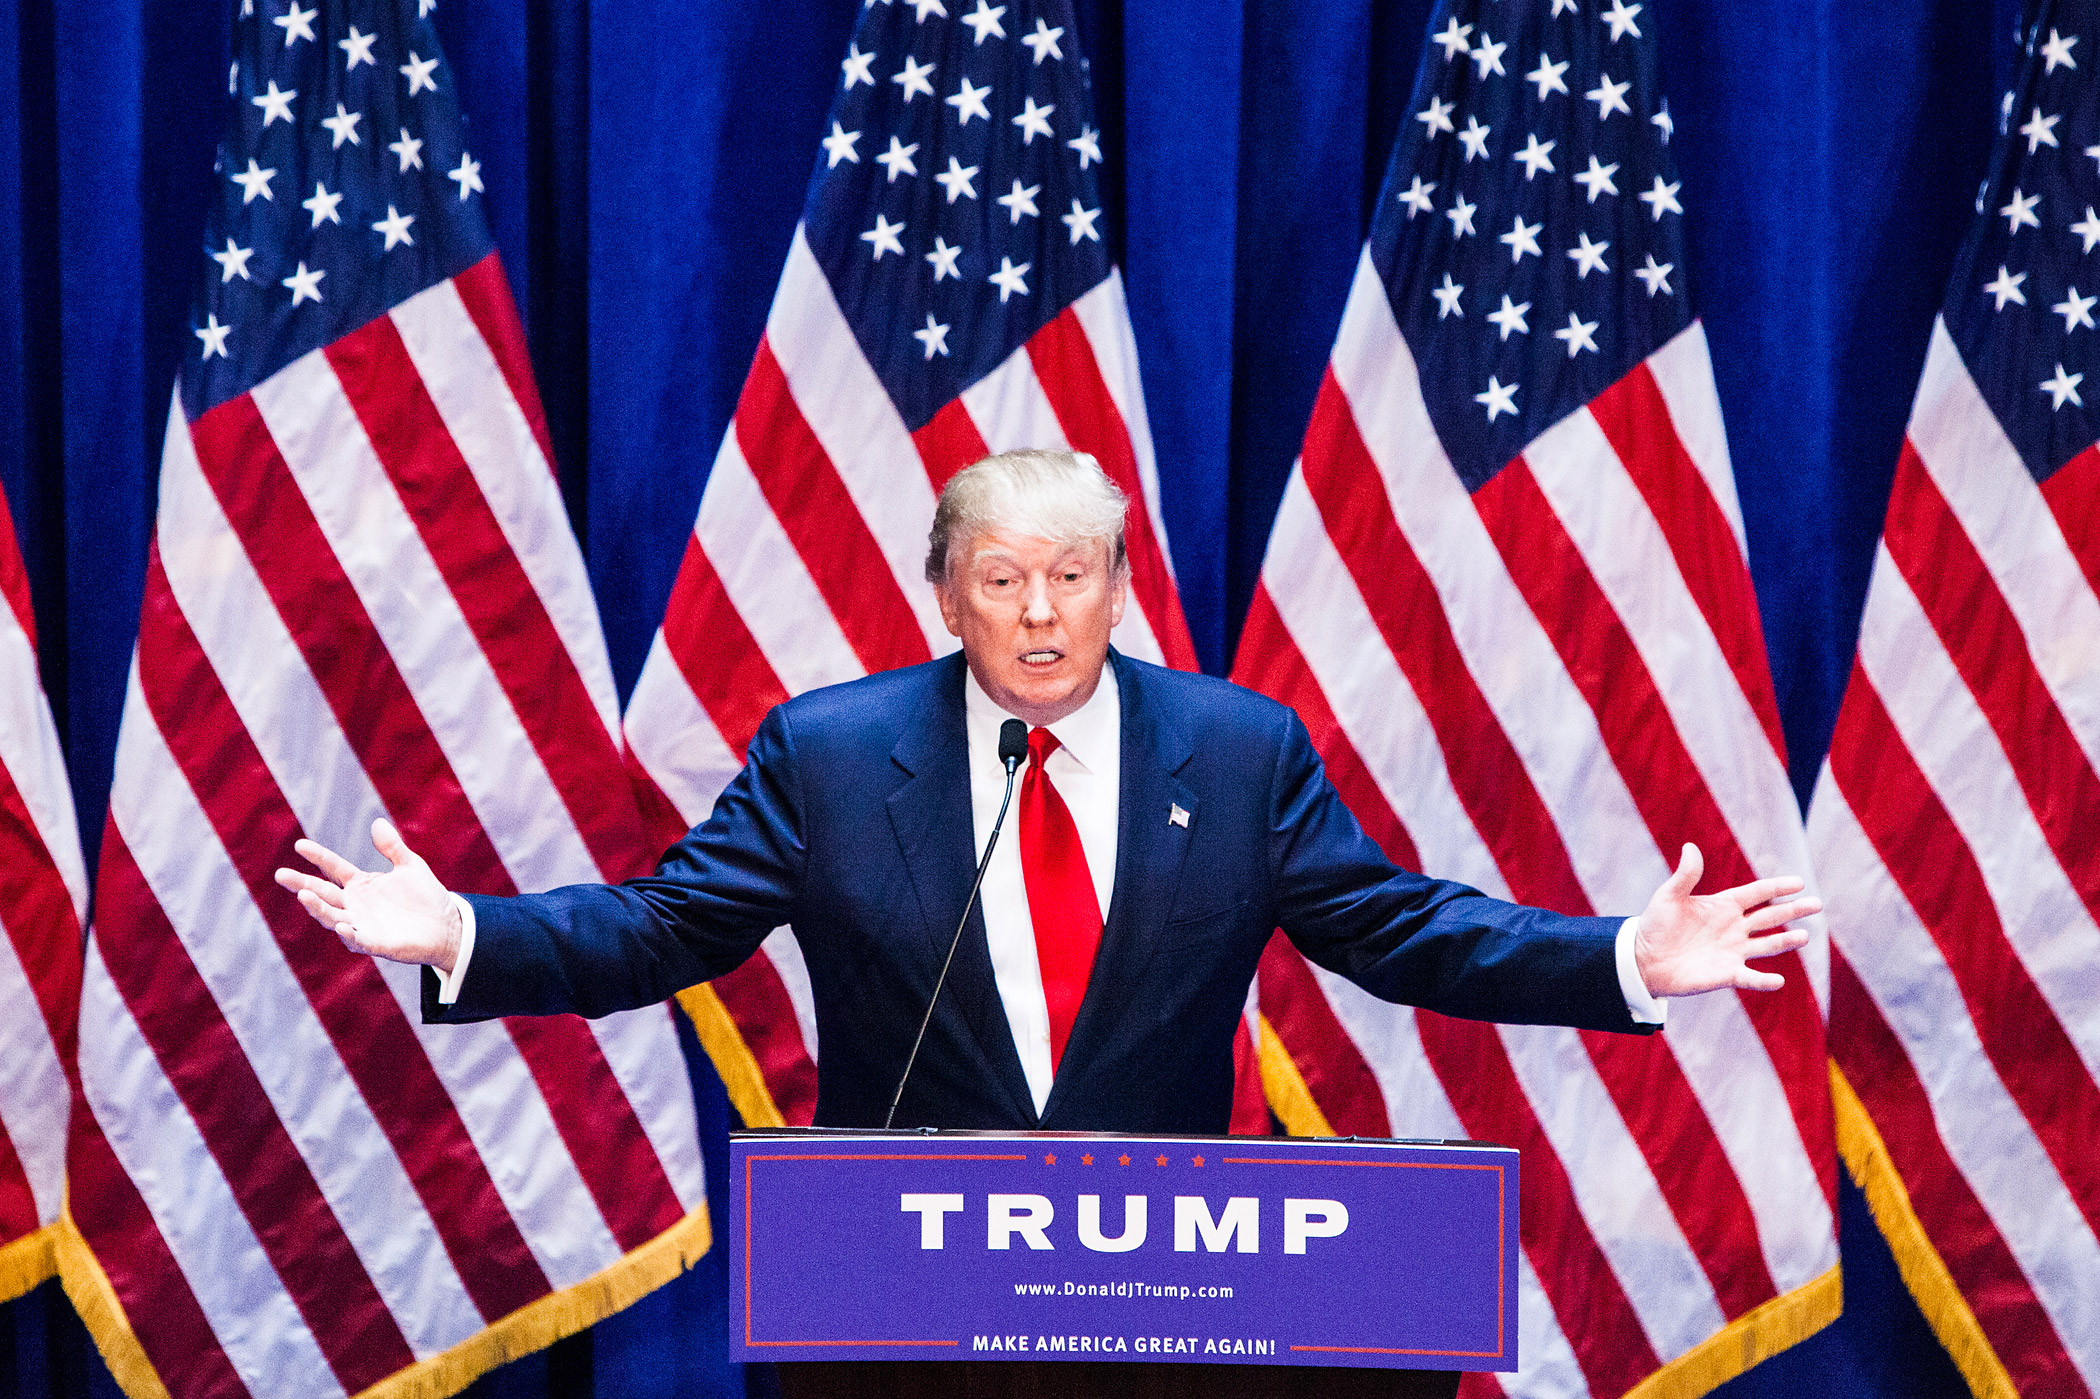 Donald Trump gives a speech as he announces his candidacy for the U.S. presidency at Trump Tower on June 16, 2015 in New York City. (Christopher Gregory—Getty Images)